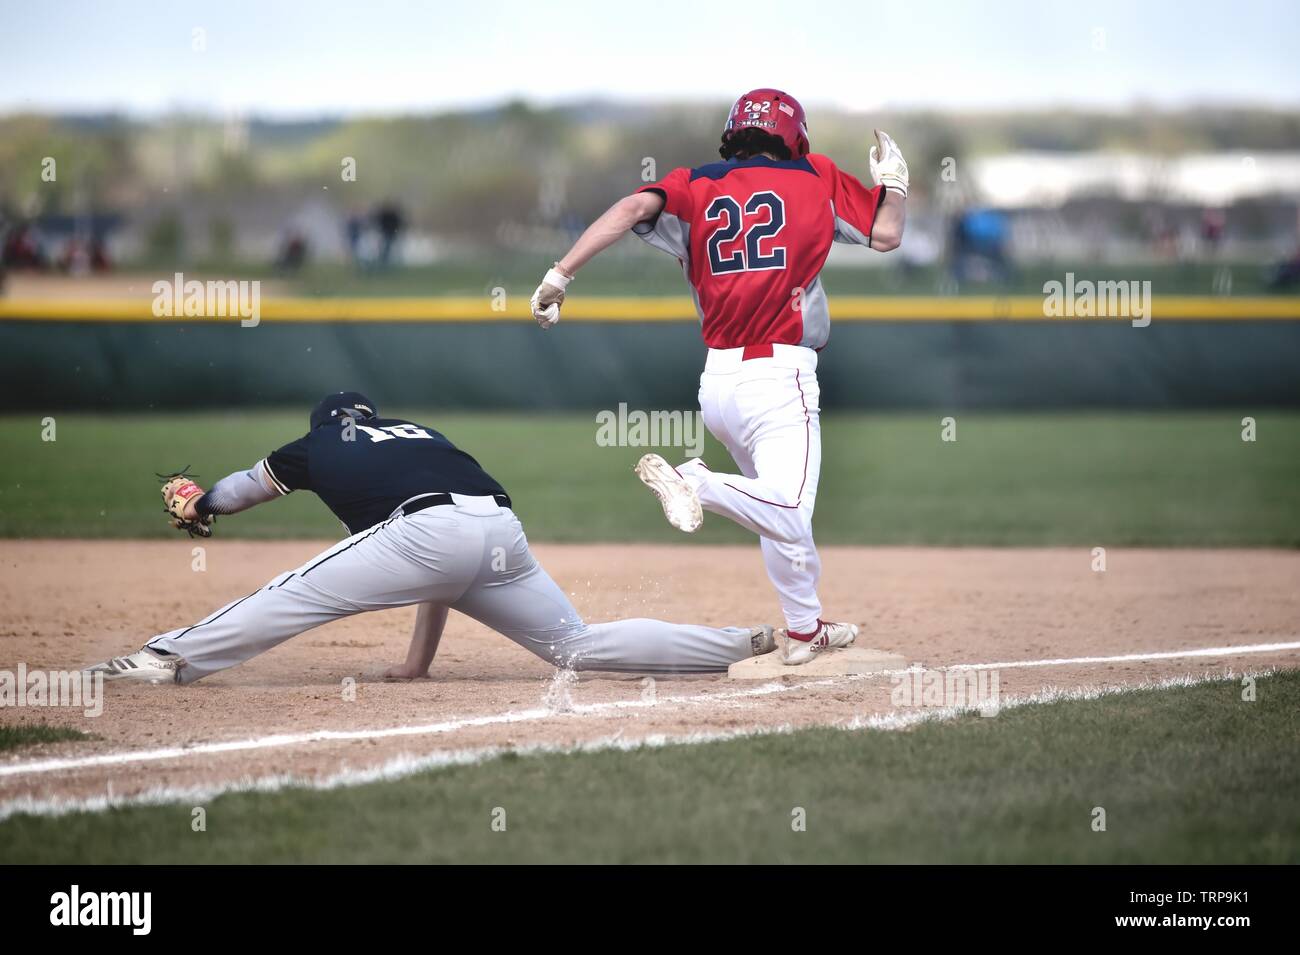 First baseman stretching to take a throw to just in time to retire the batter at first base. USA. Stock Photo